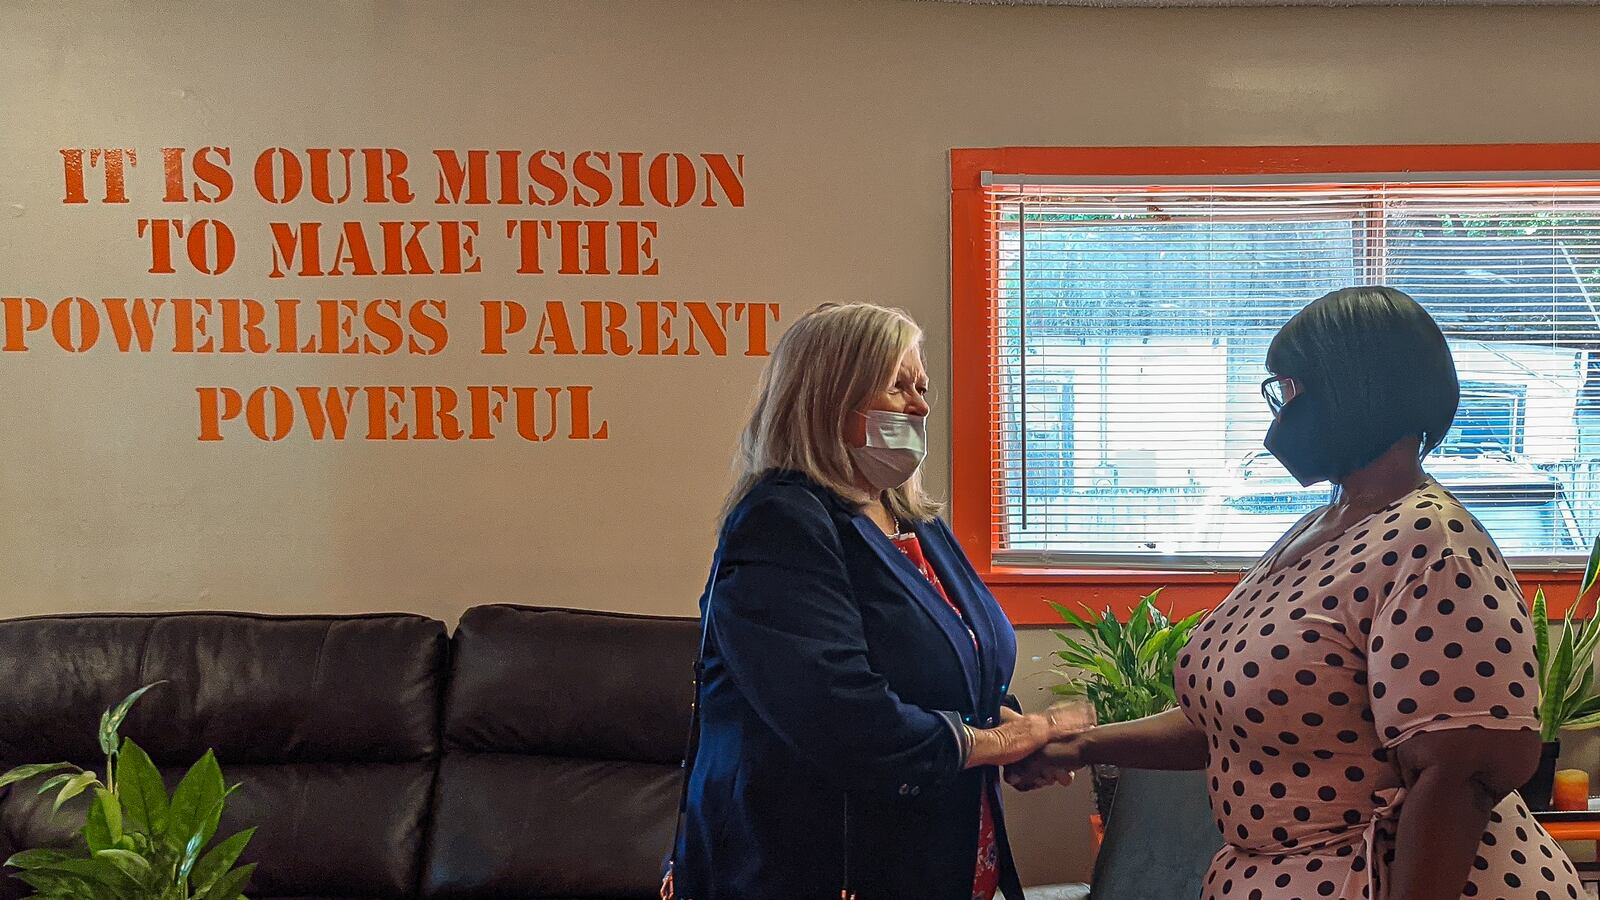 Debra Moody shakes hands with Teresena Medlock at the Memphis Lift headquarters. Painted on the wall behind them is a statement that says, “It is our mission to make the powerless parents powerful.”